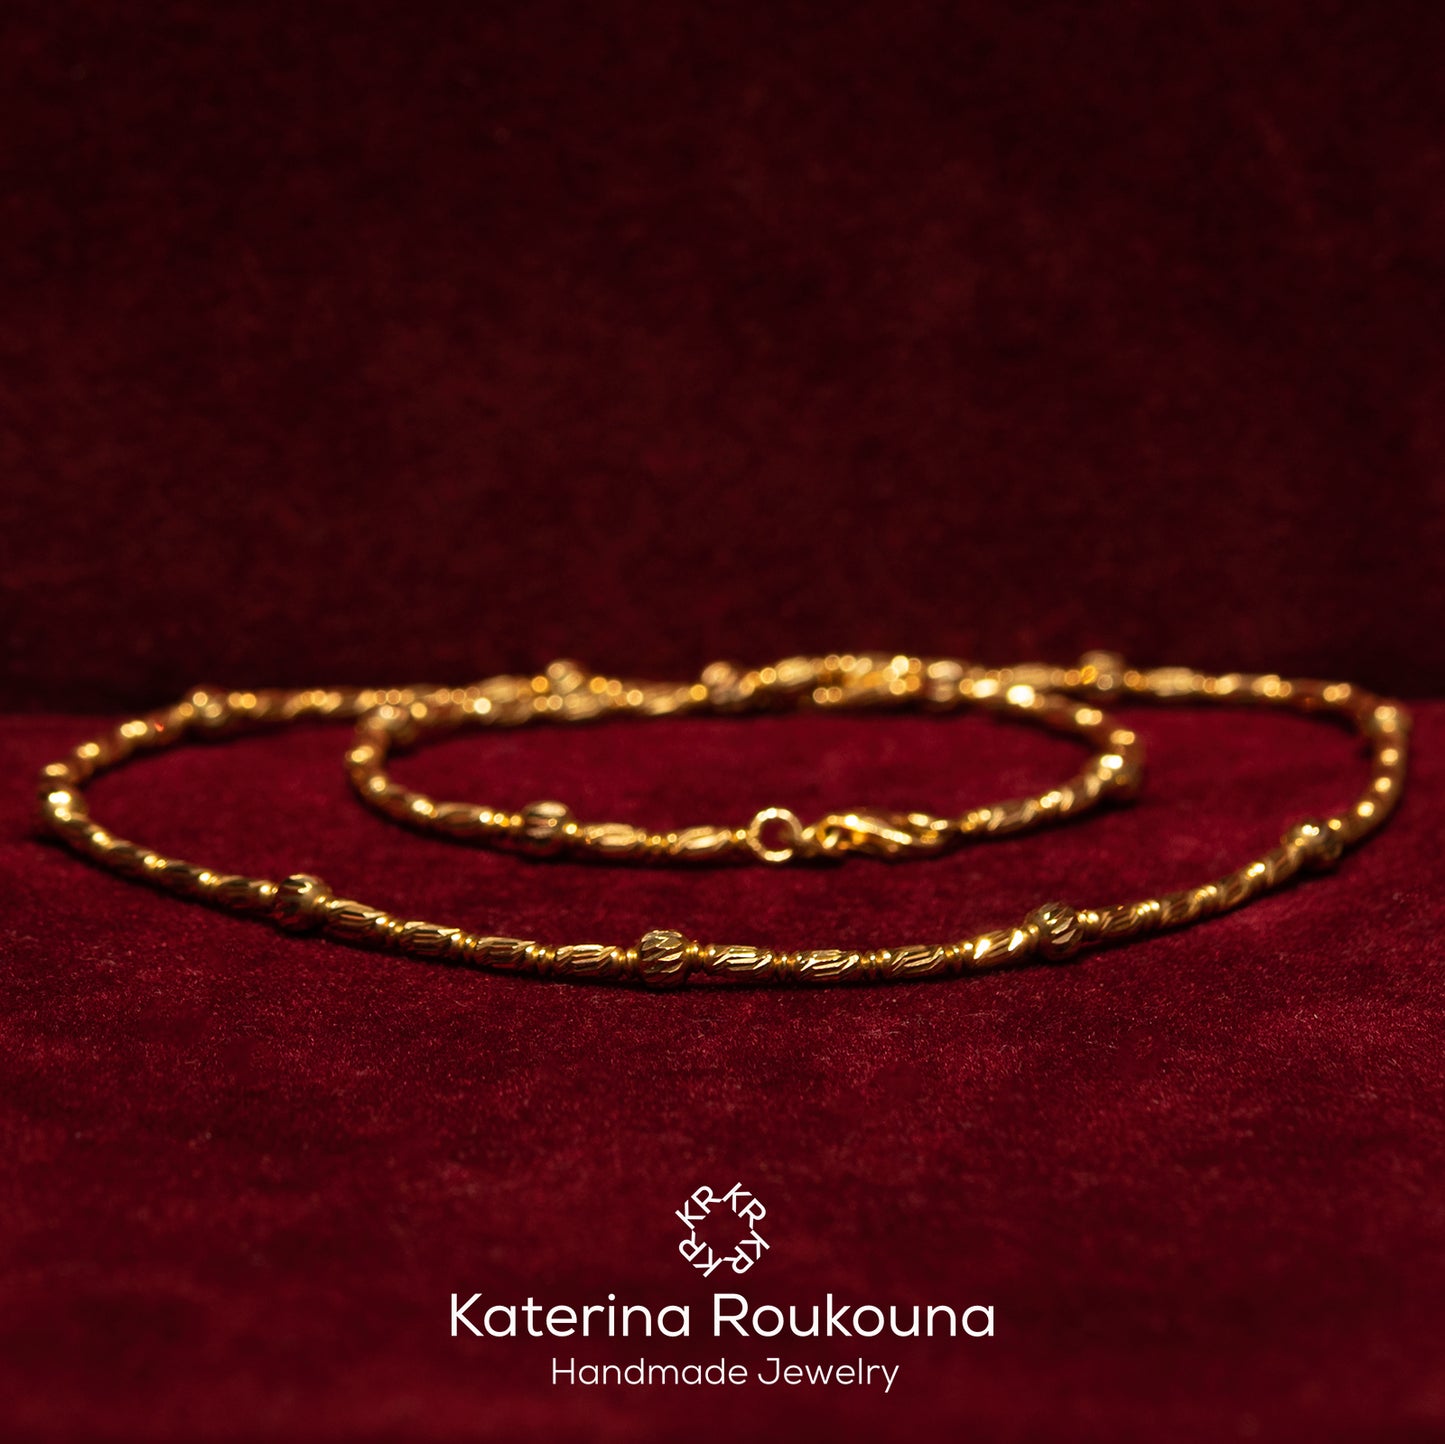 Gold necklace 14K with ovals and round beads